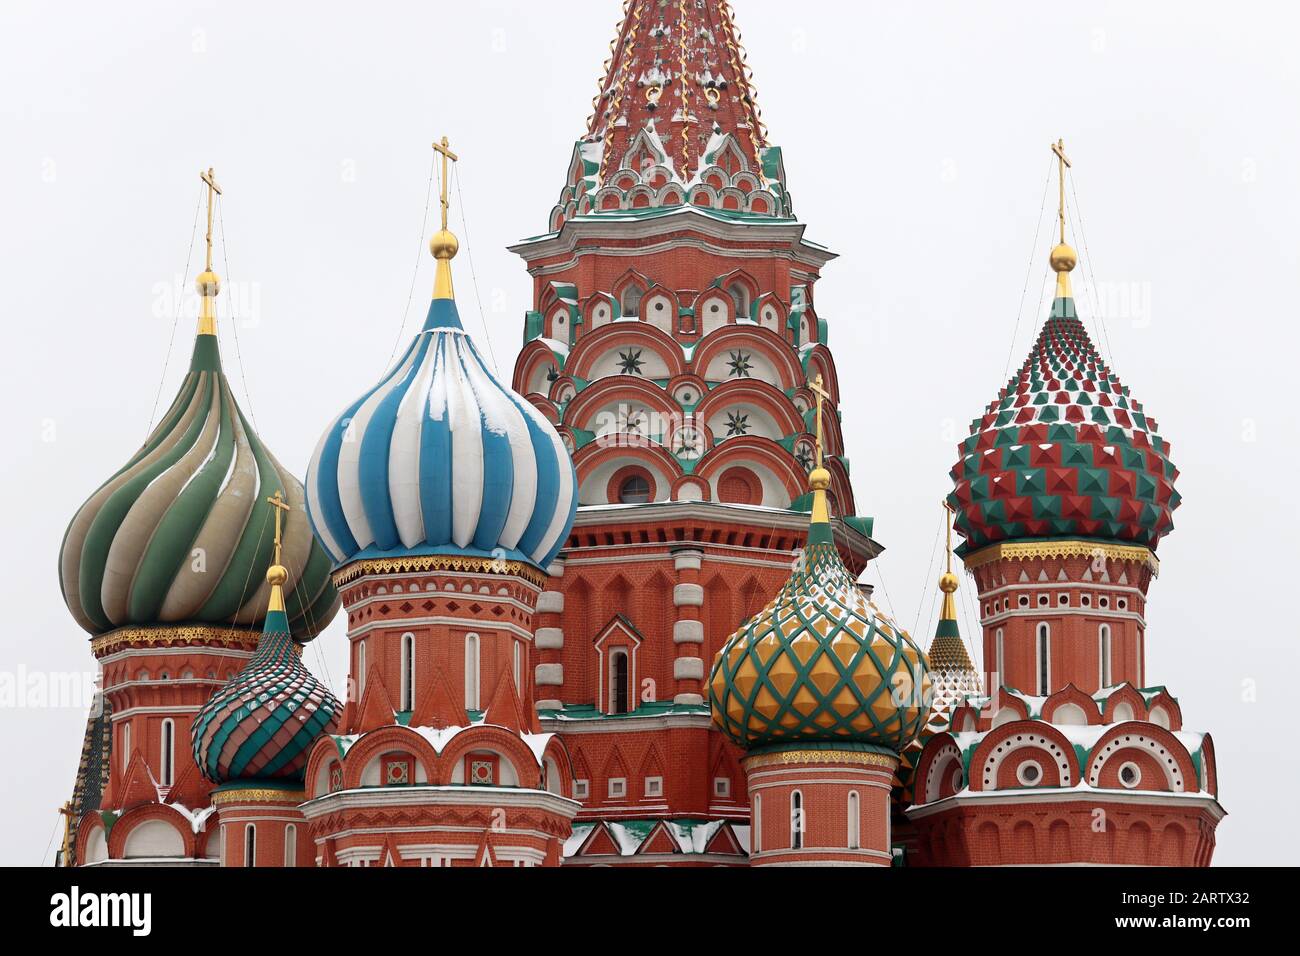 St. Basil's Cathedral against the winter sky, close-up of domes covered with snow. Russian architecture landmark, located on Red square in Moscow Stock Photo